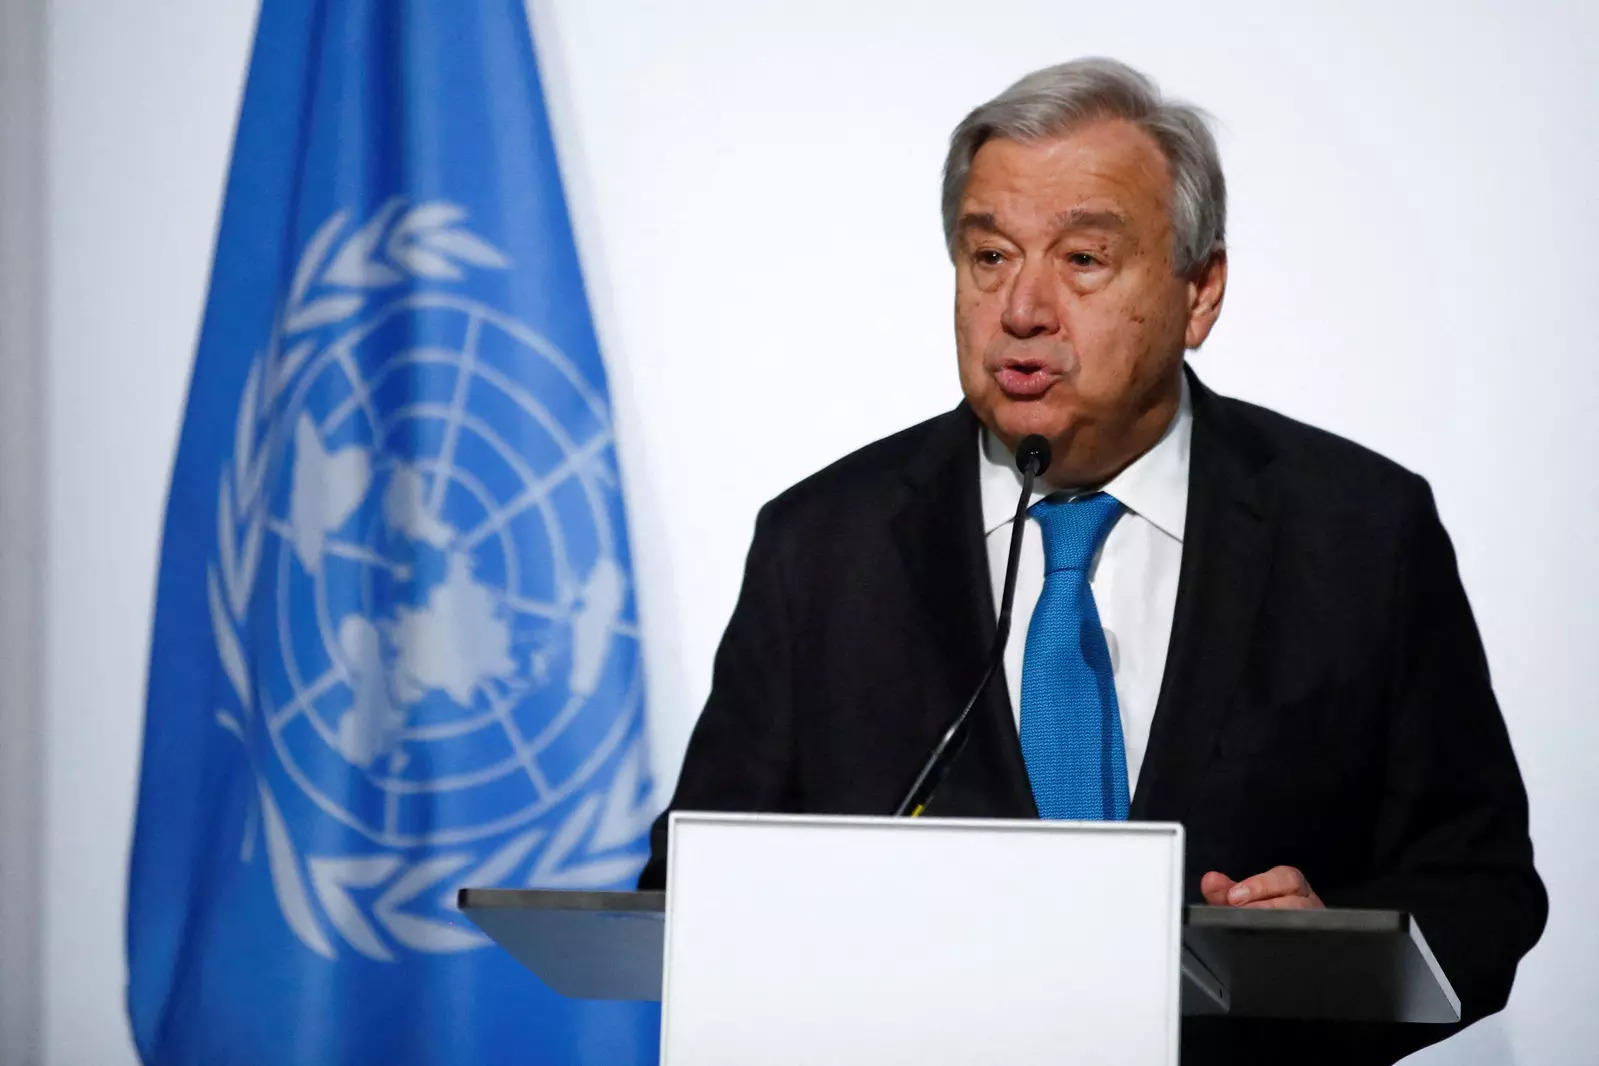 'UN Secretariat does not take money from oil and gas industry'